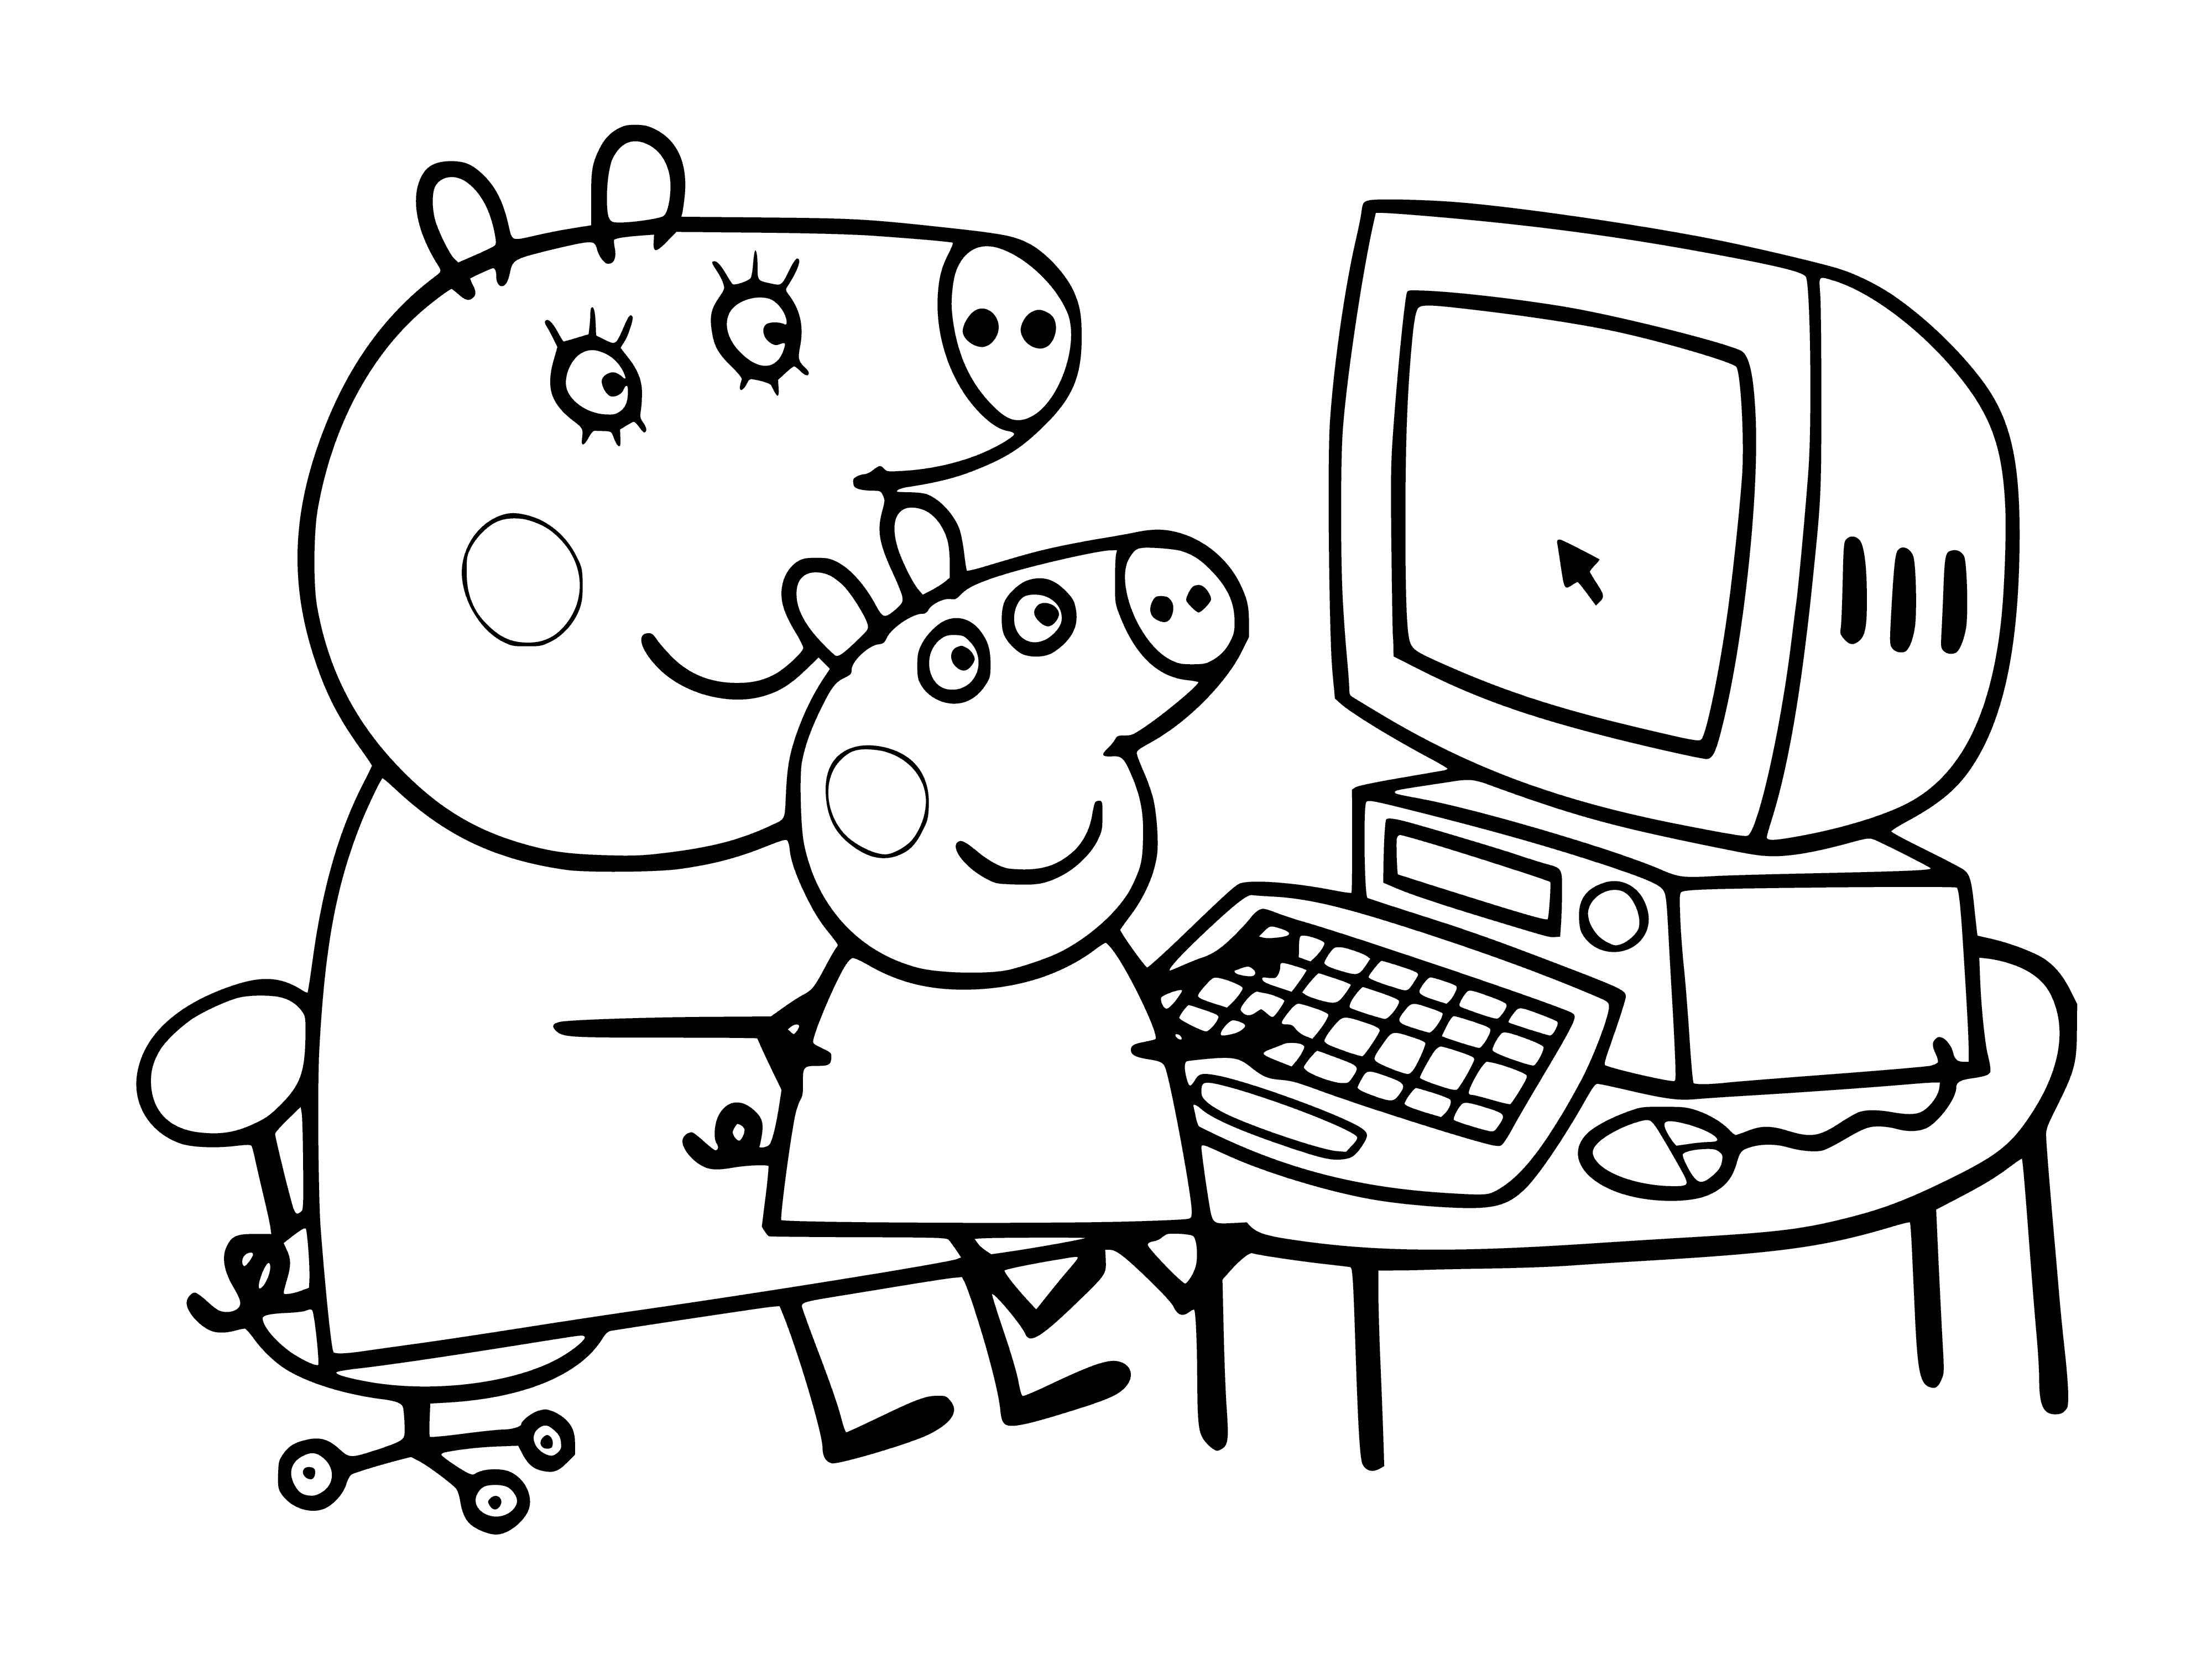 Peppa at the computer coloring page